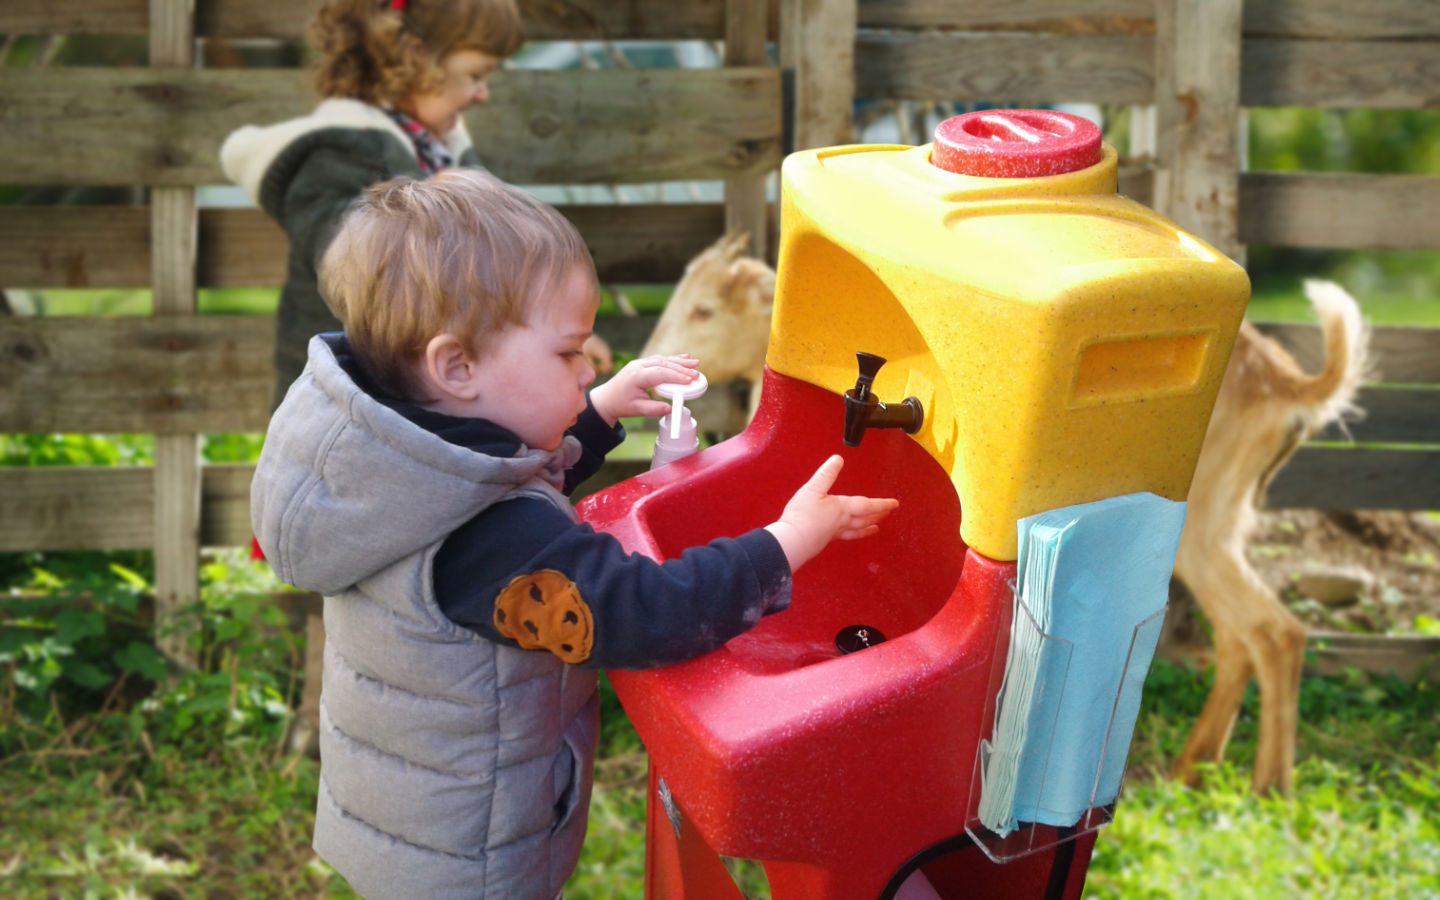 Children must wash hands with soap and water when participating in Open Farm Sunday